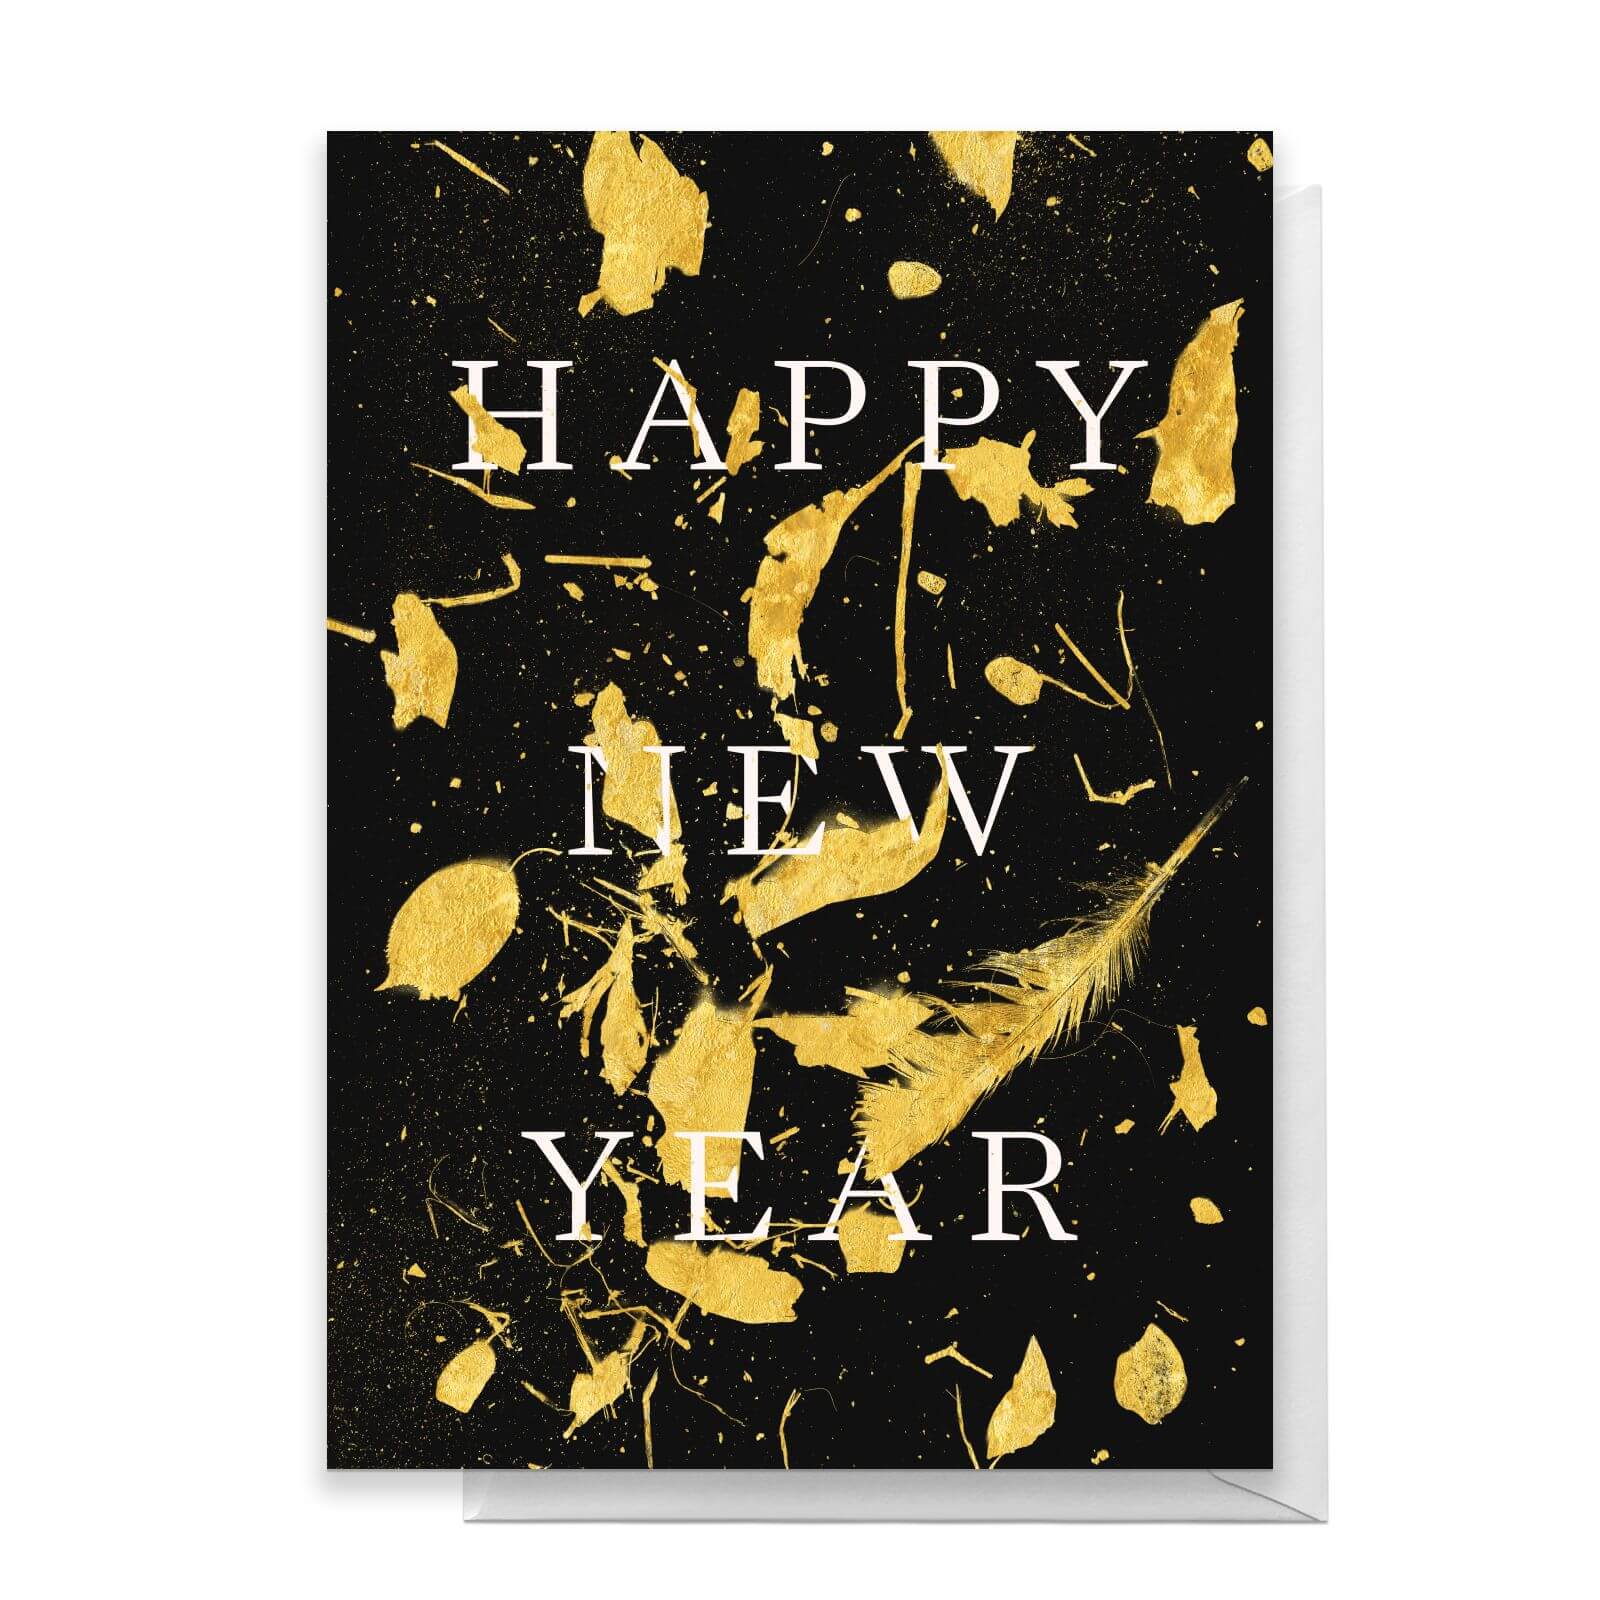 Happy New Year Greetings Card - Standard Card